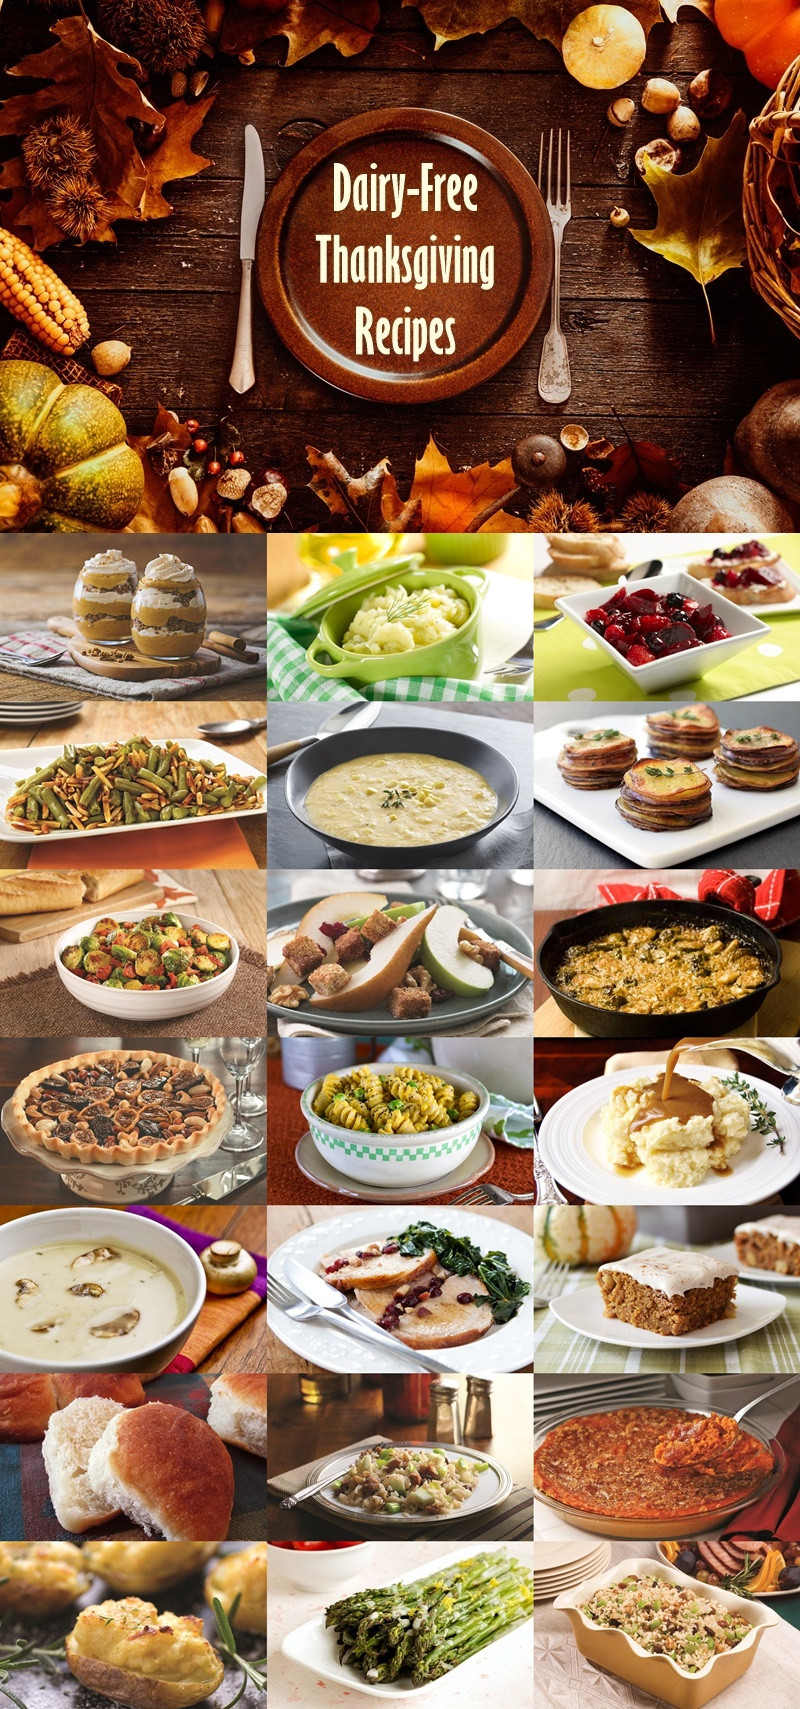 Dairy Free Desserts To Buy
 The Biggest Gathering of Dairy Free Thanksgiving Recipes